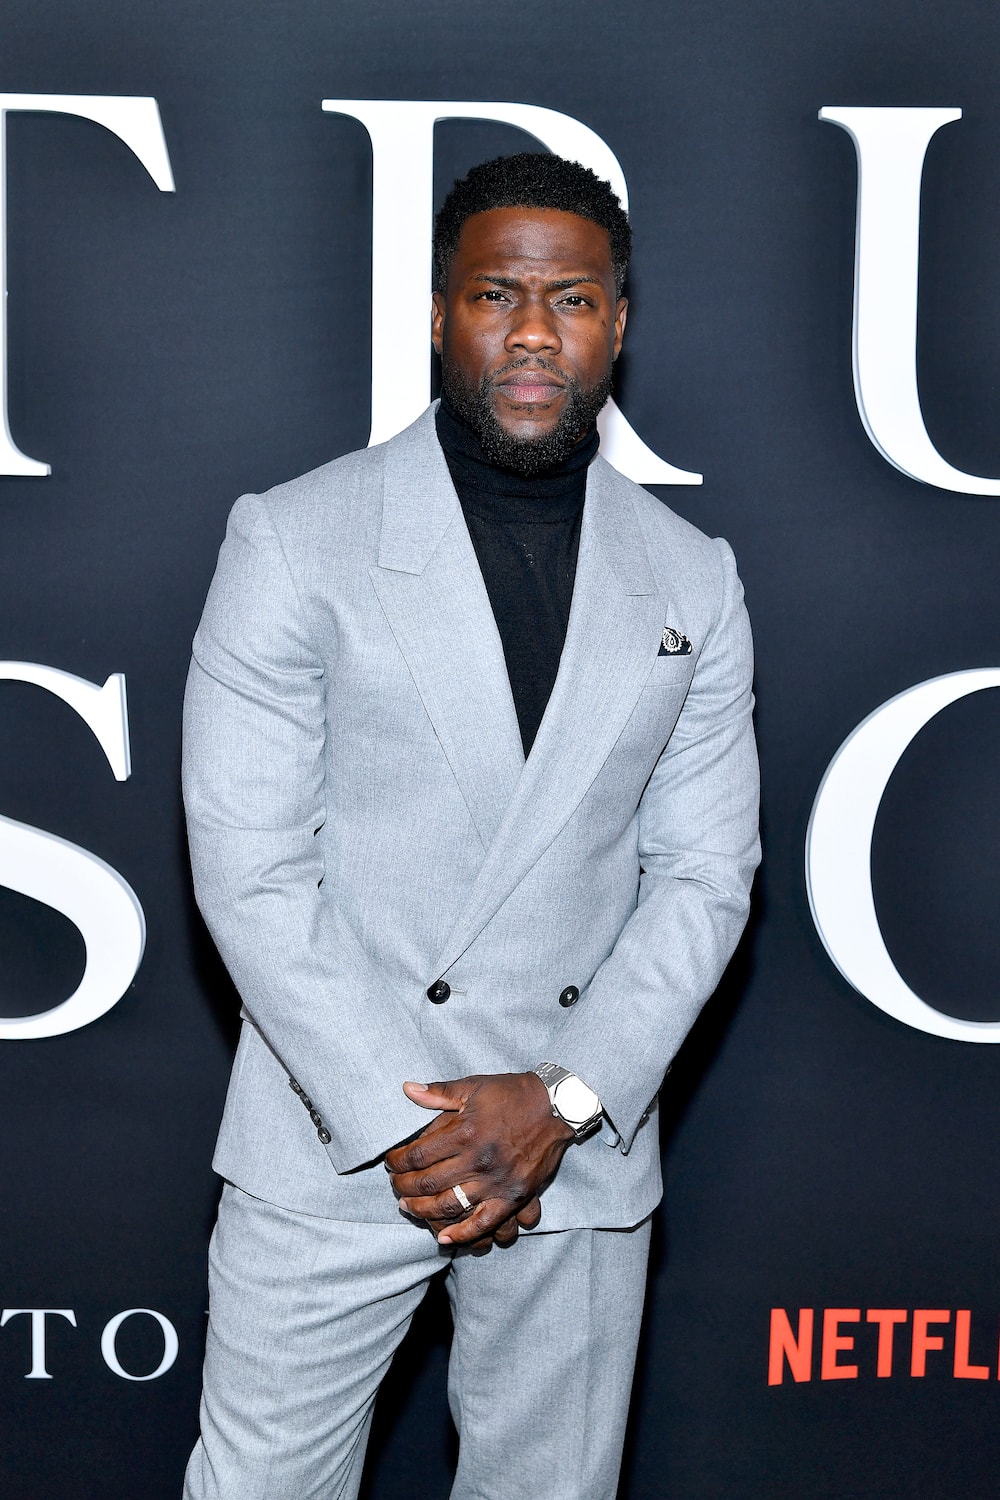 What is Kevin Hart net worth?